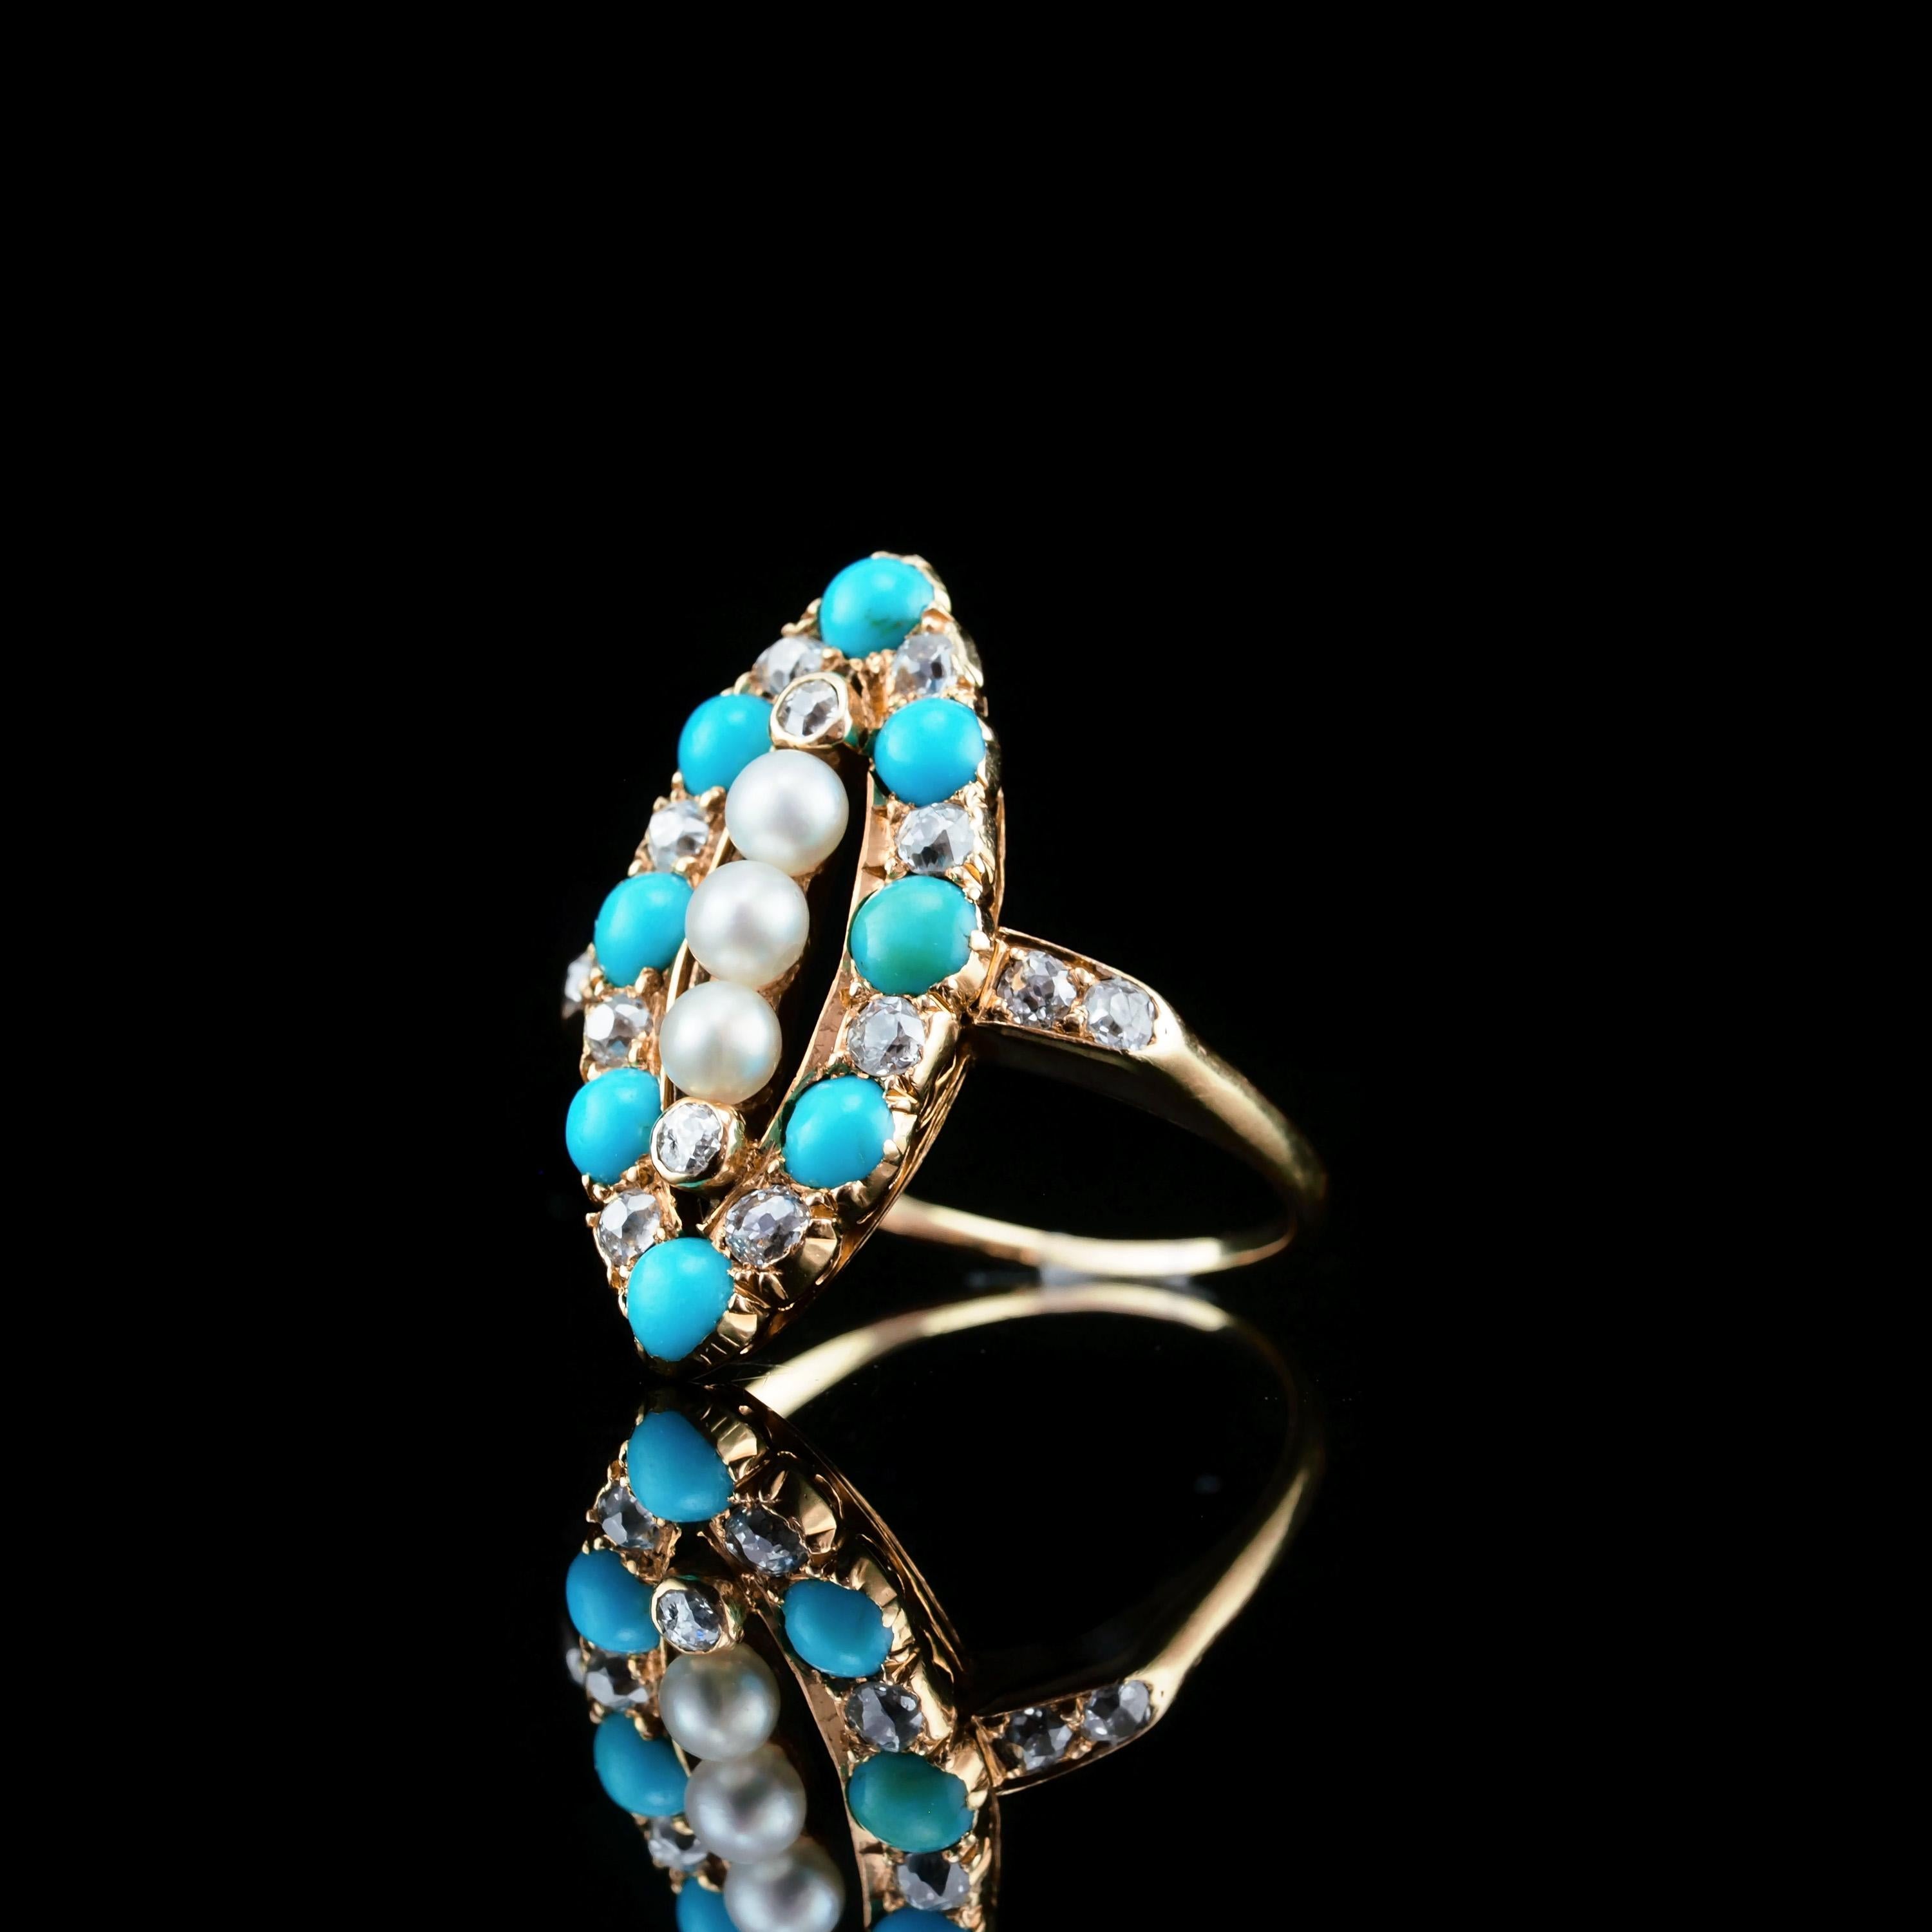 Antique Victorian Diamond Pearl Turquoise 18K Gold Ring Navette/Marquise c.1880 For Sale 7